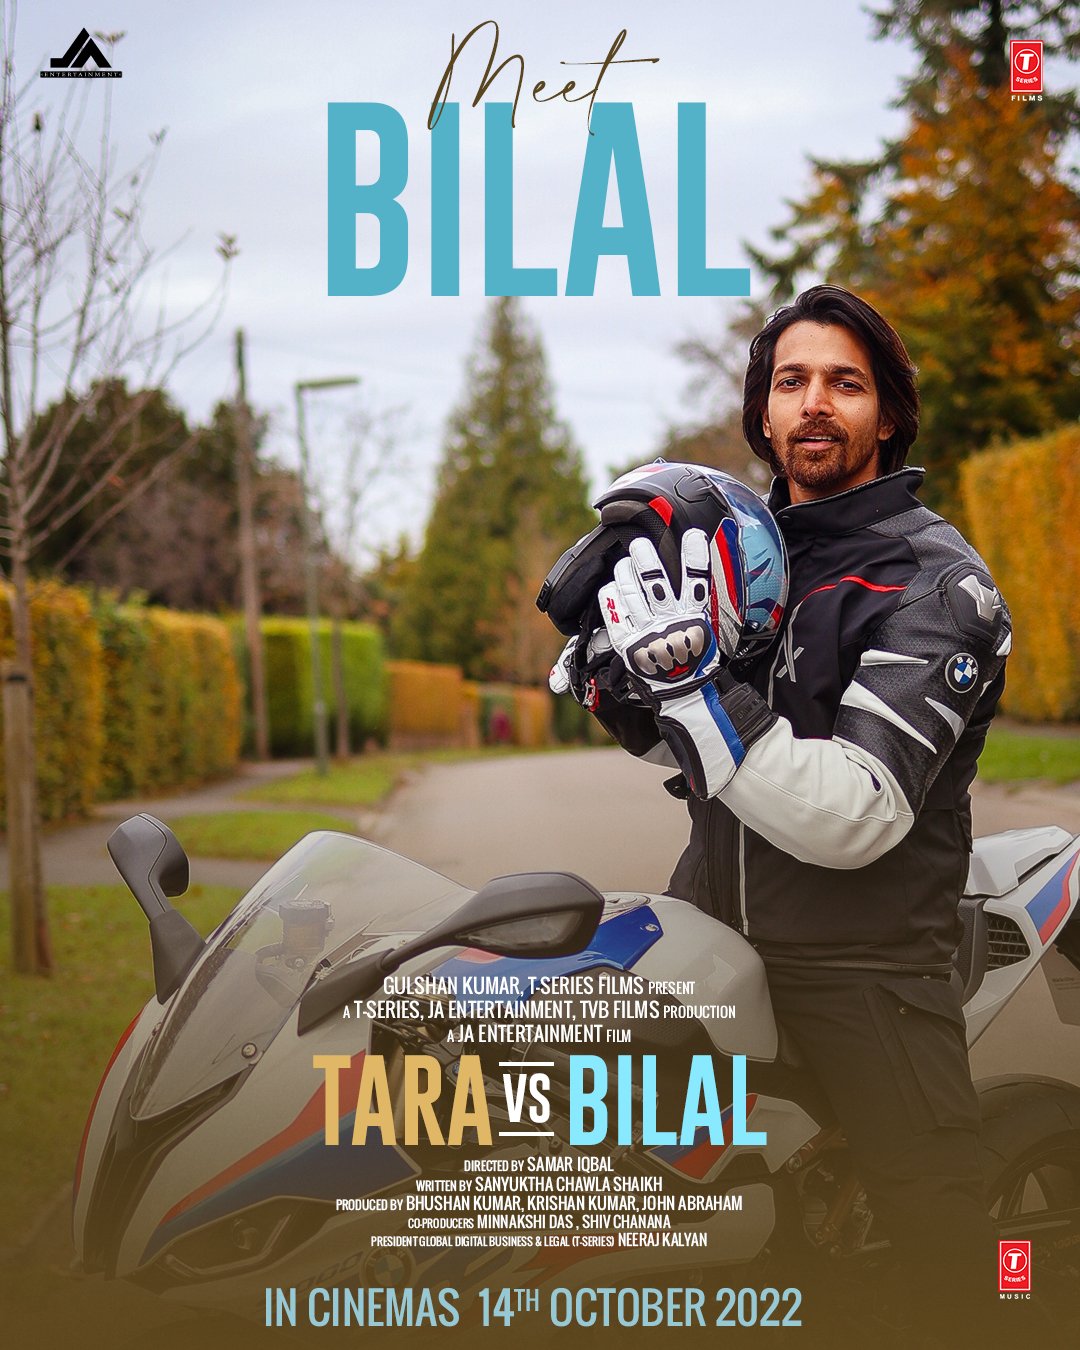 Tara Vs Bilal Movie Ticket Offers|Up To 50% Off On Bookings